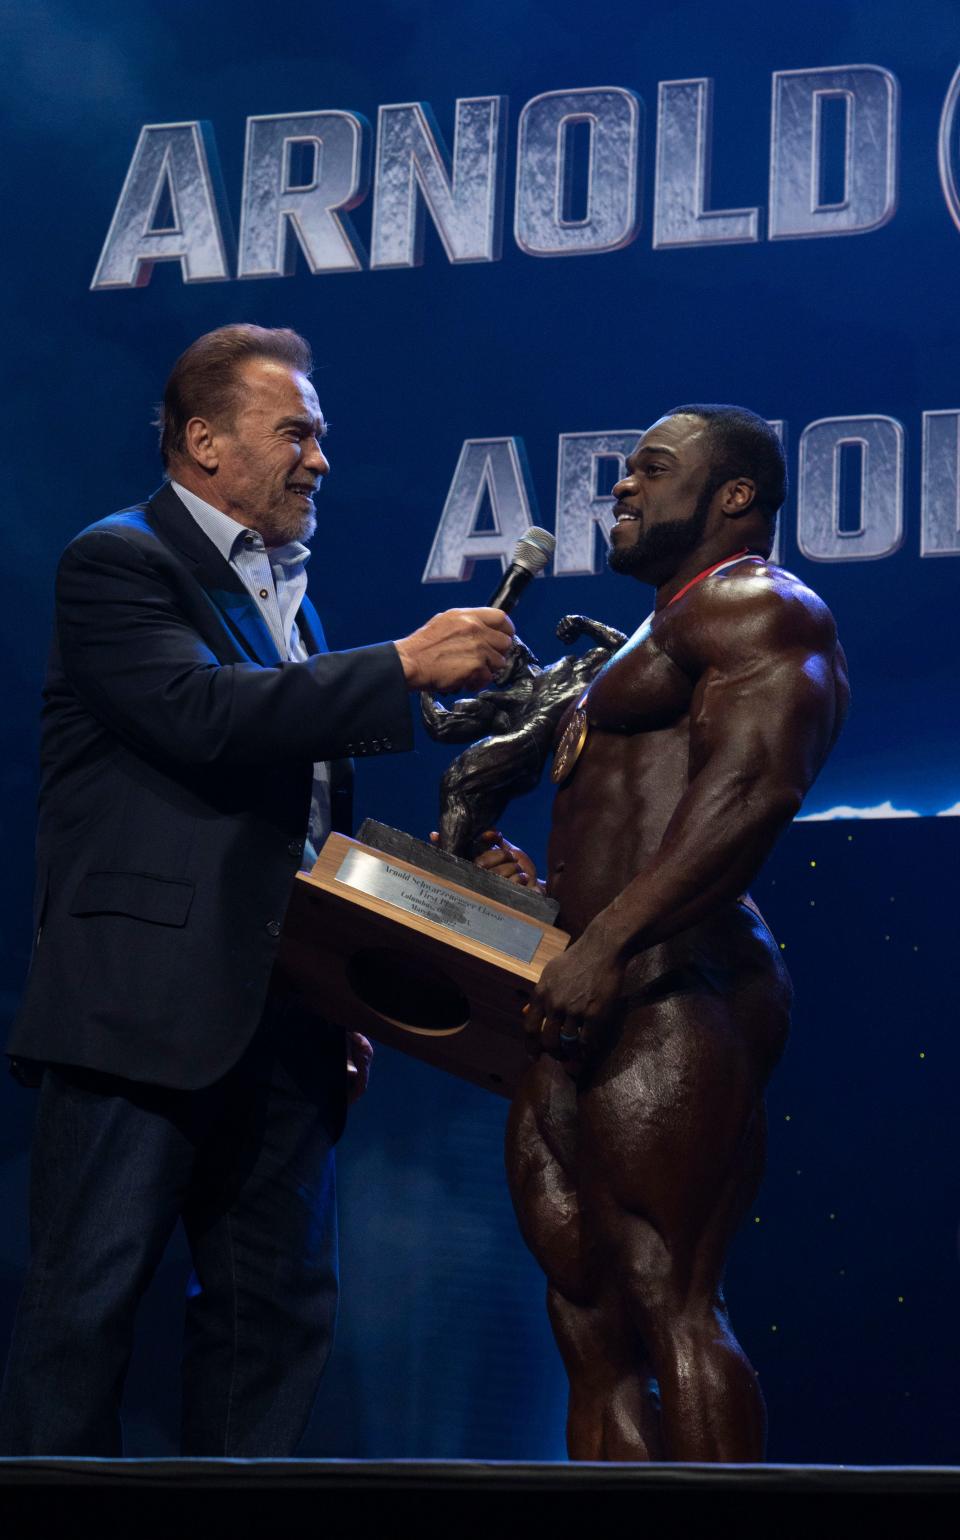 Arnold Schwarzenegger presents the first place trophy to Brandon Curry for the Pro Bodybuilding Arnold Classic during the Arnold Classic Finals at the Greater Columbus Convention Center in Columbus, Ohio, on Saturday, March 5, 2022.